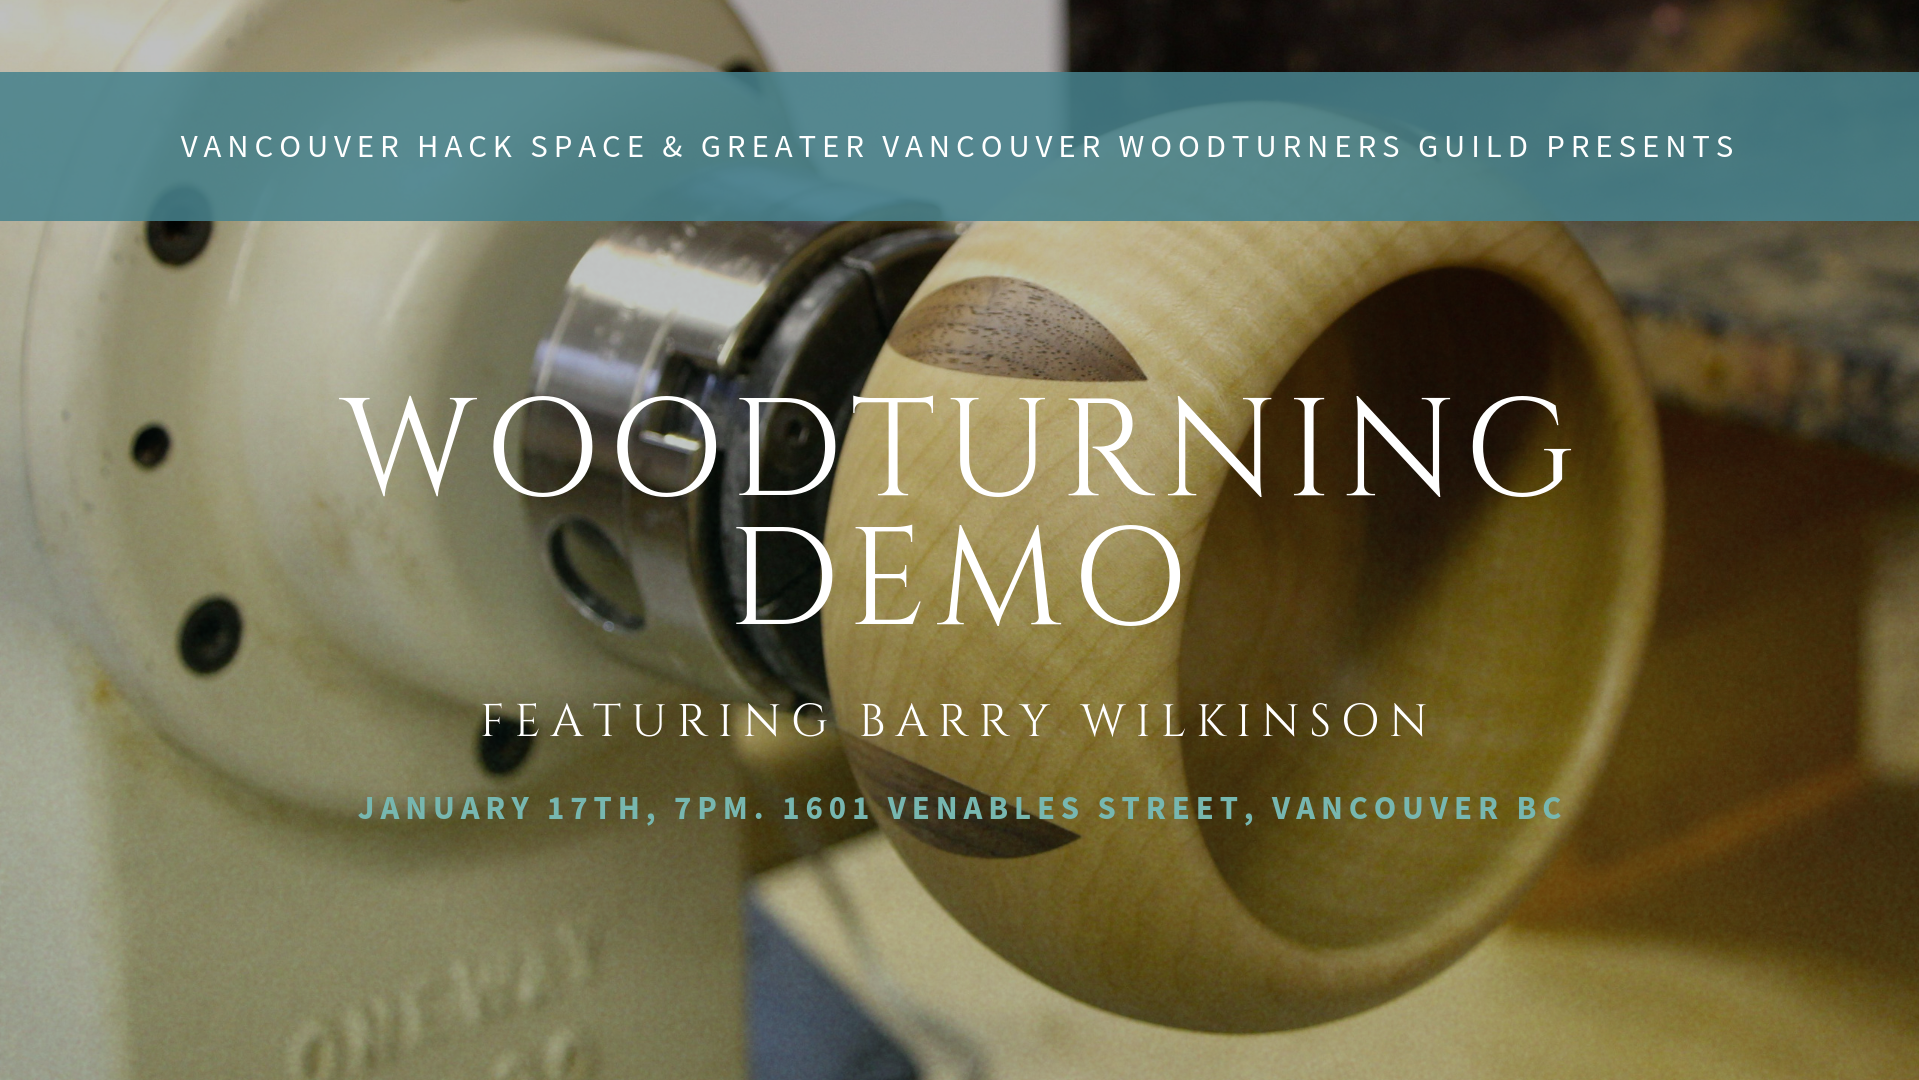 WOODTURNING DEMO Featuring Barry Wilkinson from Greater Vancouver Woodturning Guild